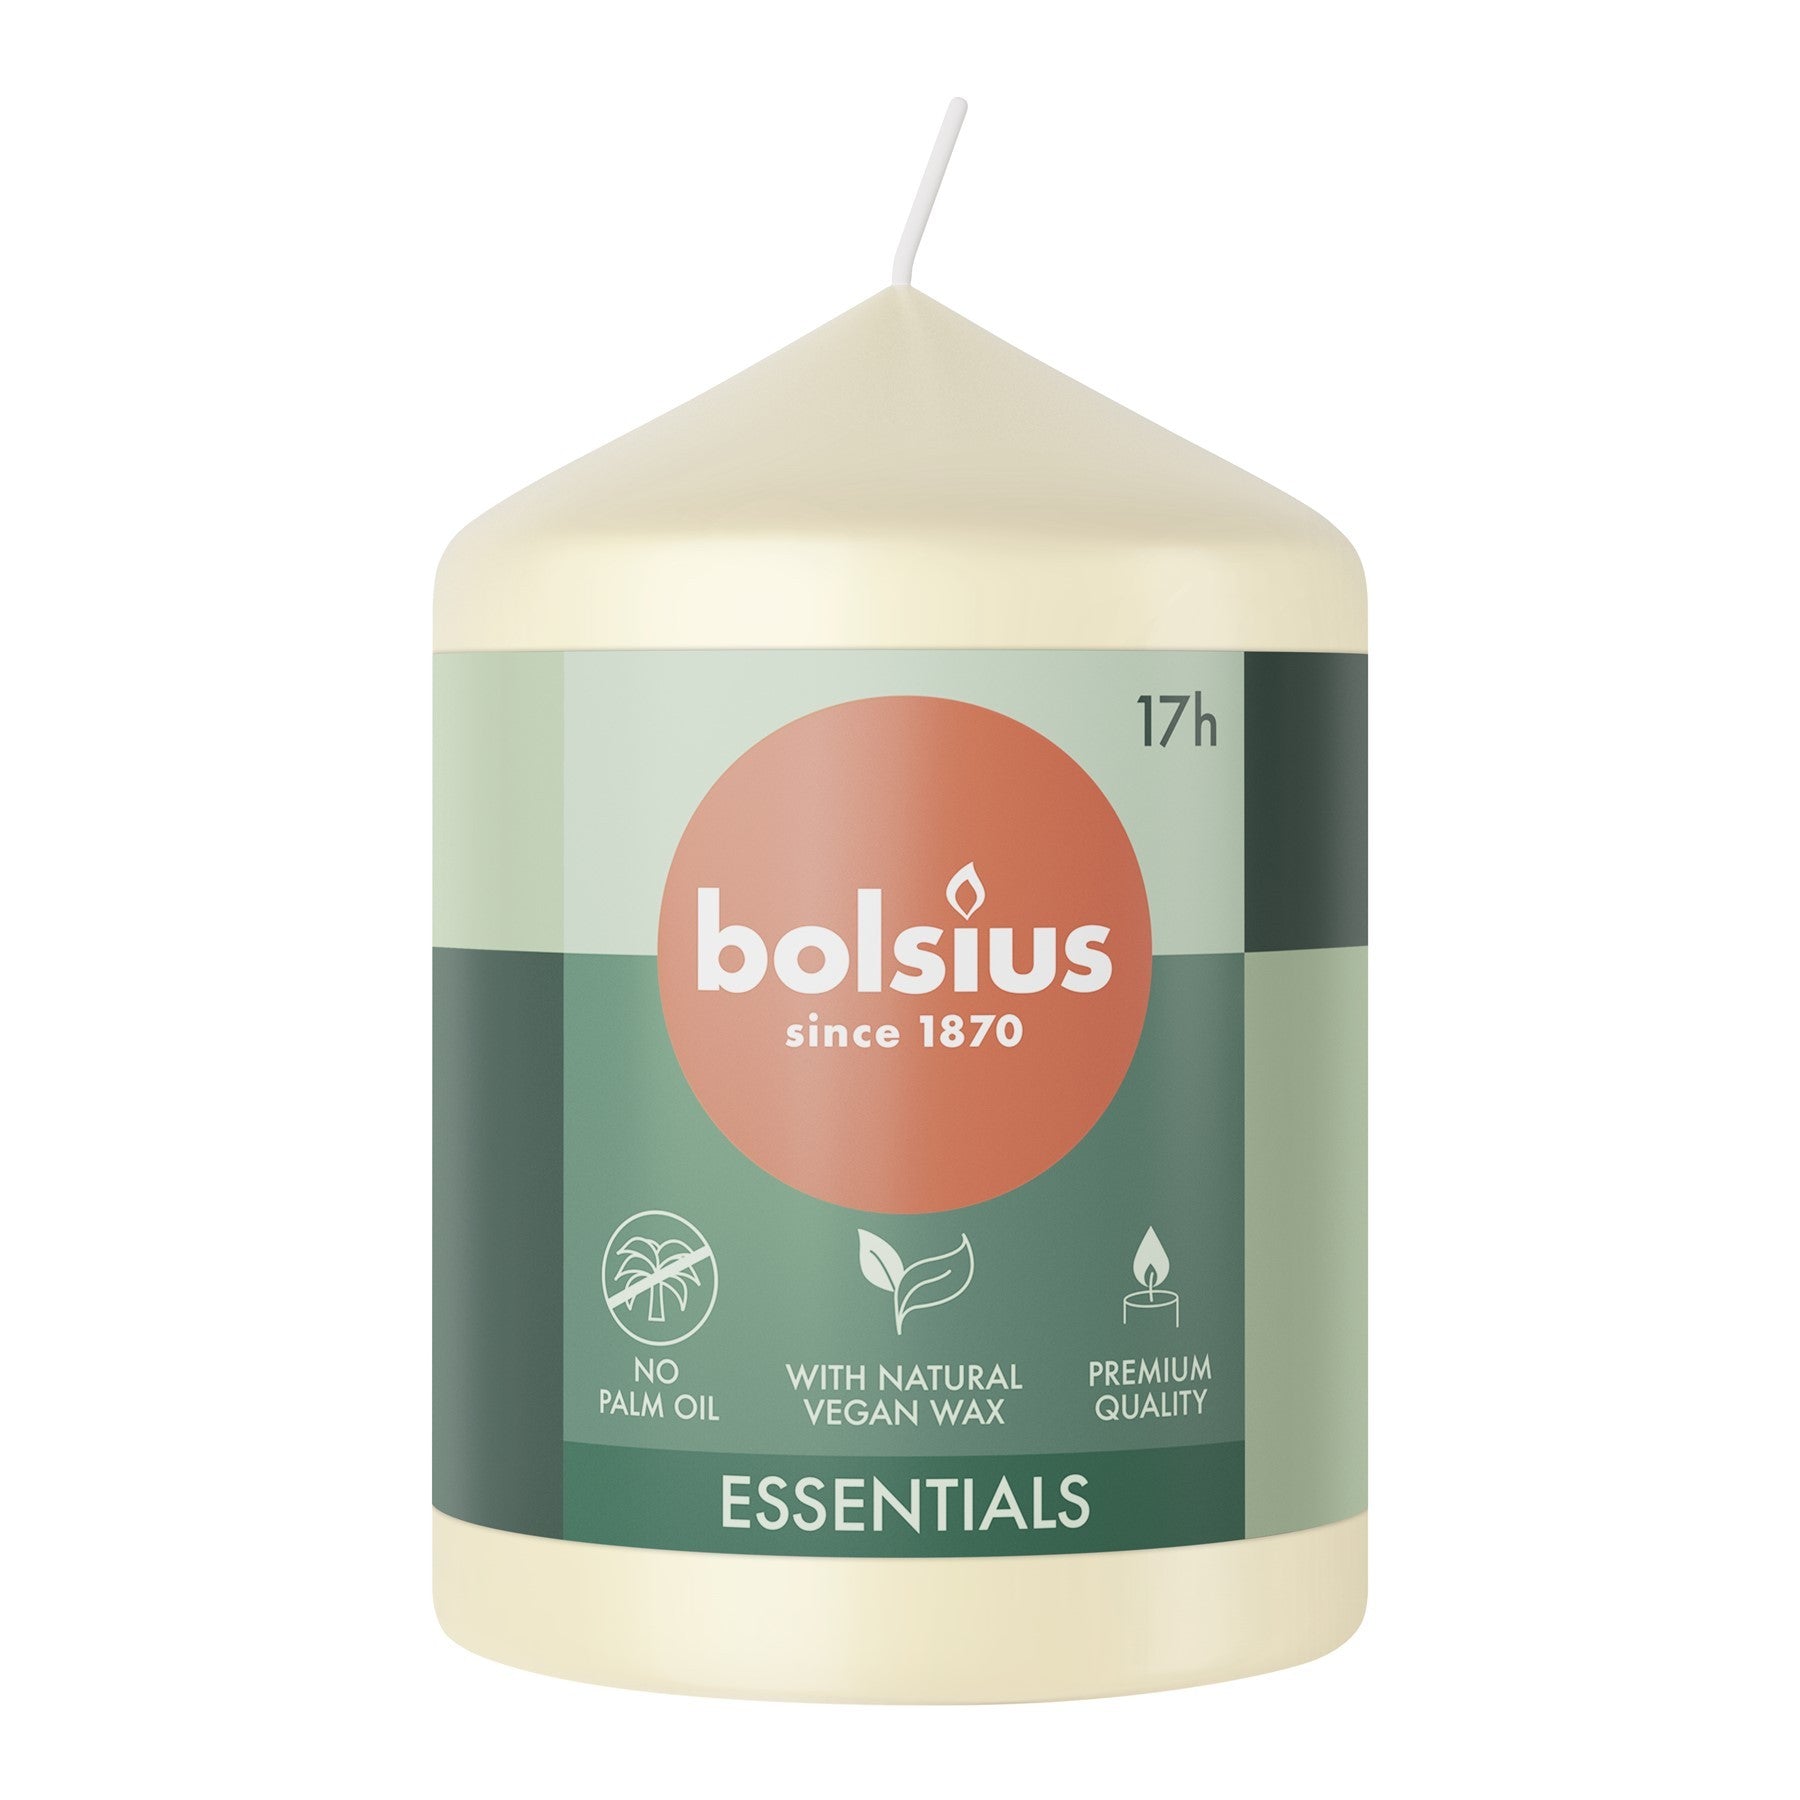 View Bolsius Soft Pearl Essential Pillar Candle 80mm x 58mm information